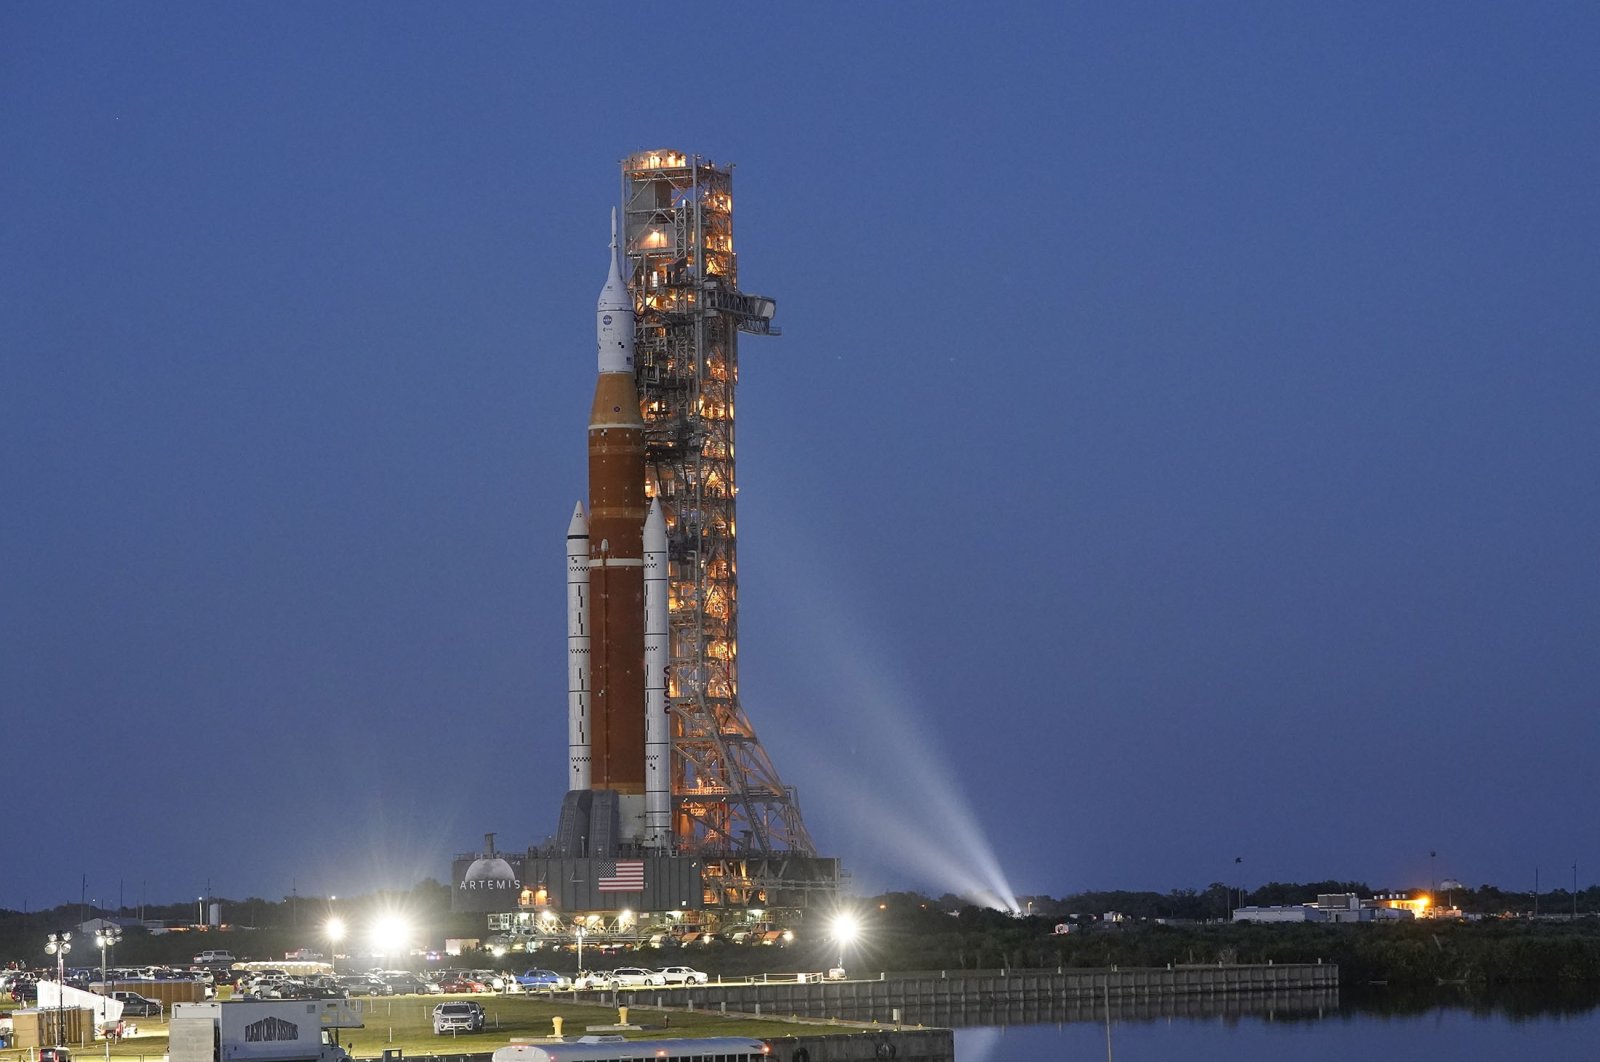 The NASA Artemis rocket with the Orion spacecraft aboard leaves the Vehicle Assembly Building moving slowly on an 11-hour journey to pad 39B at the Kennedy Space Center in Cape Canaveral, Florida, U.S., March 17, 2022. (AP Photo)